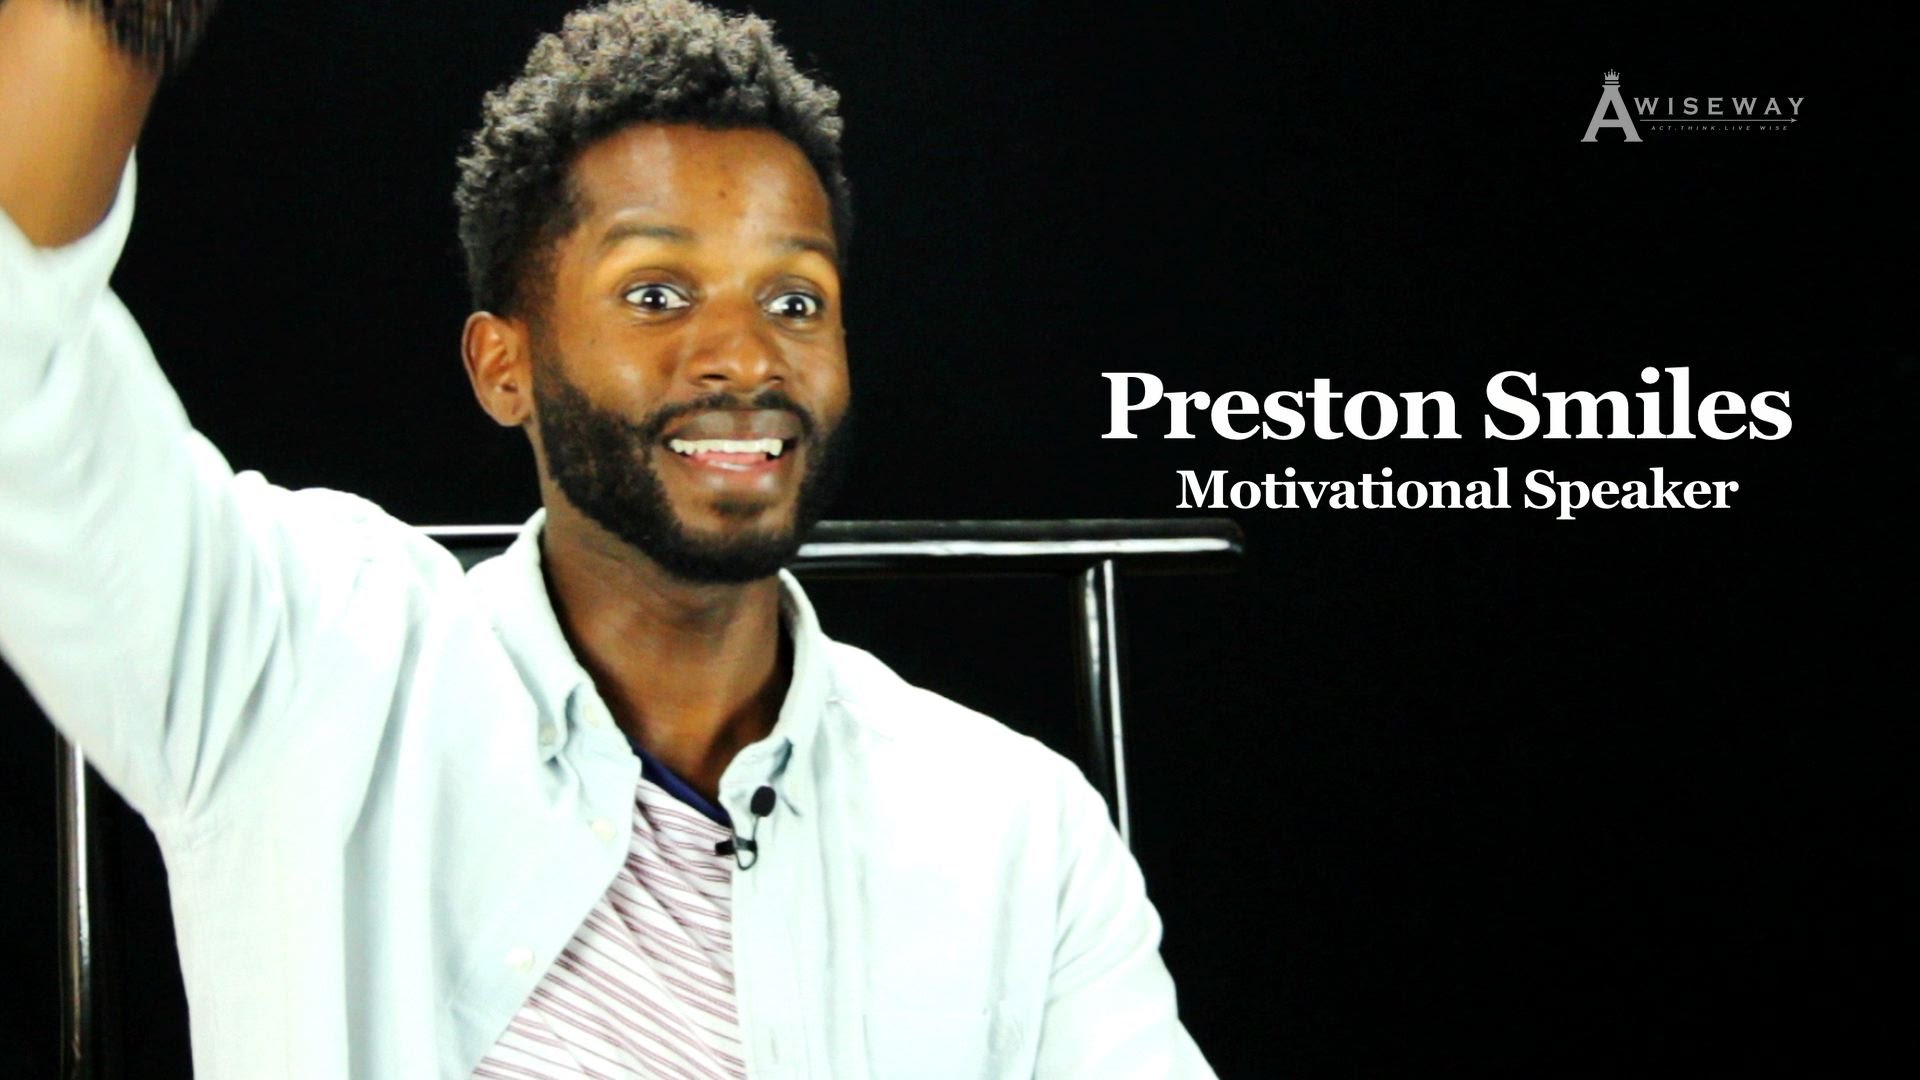 Preston Smiles Explains Exactly Why No Deed Is Too Small